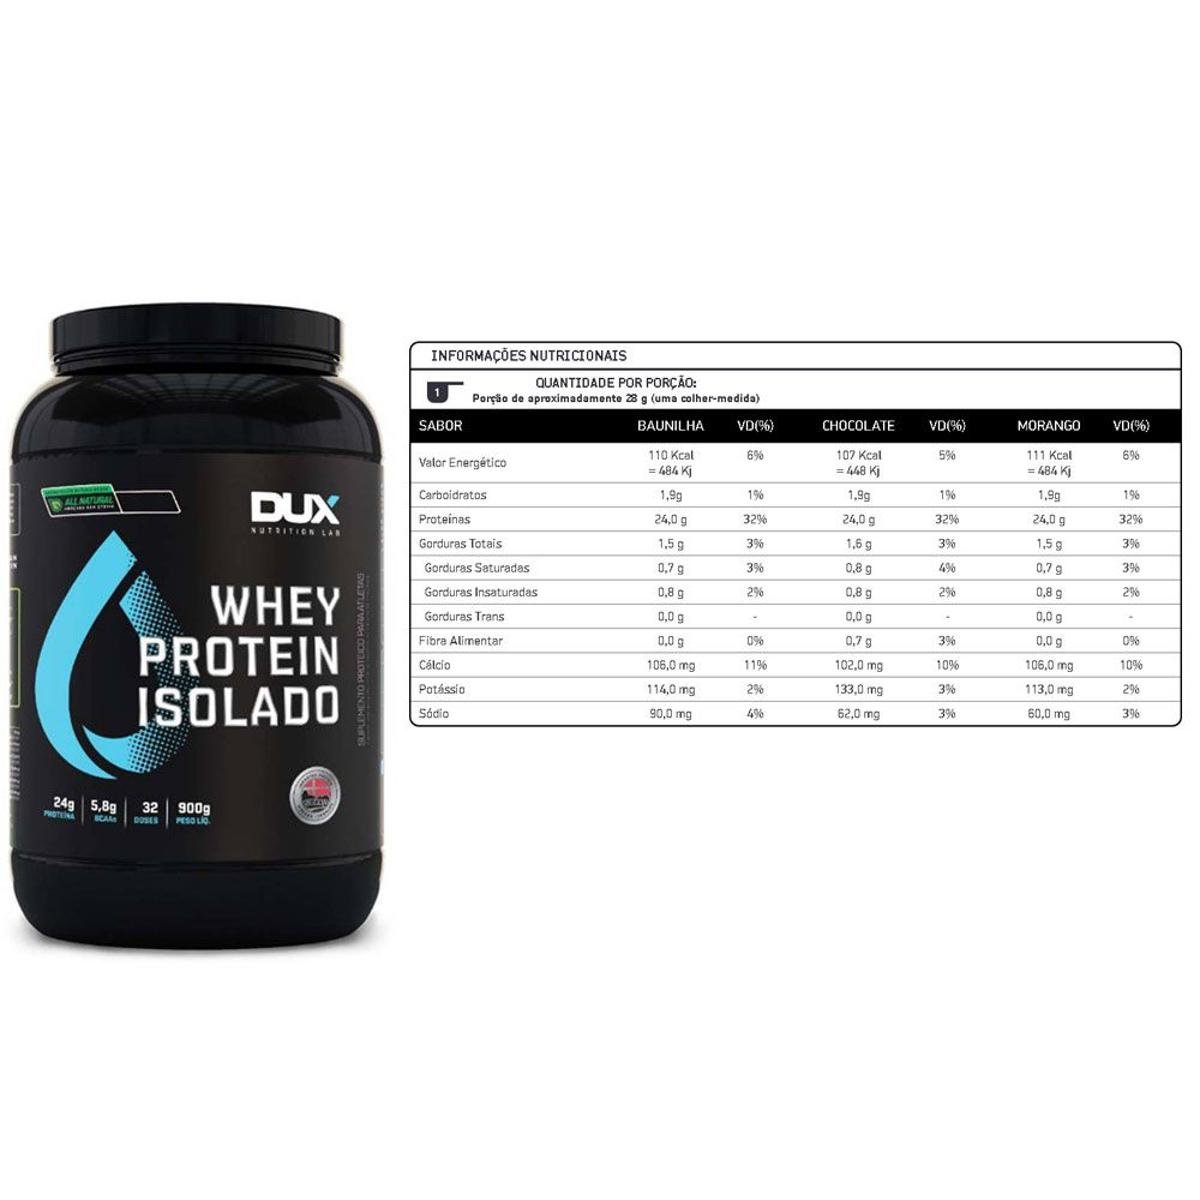 WHEY PROTEIN ISOLADO ALL NATURAL (900G) - DUX NUTRITION